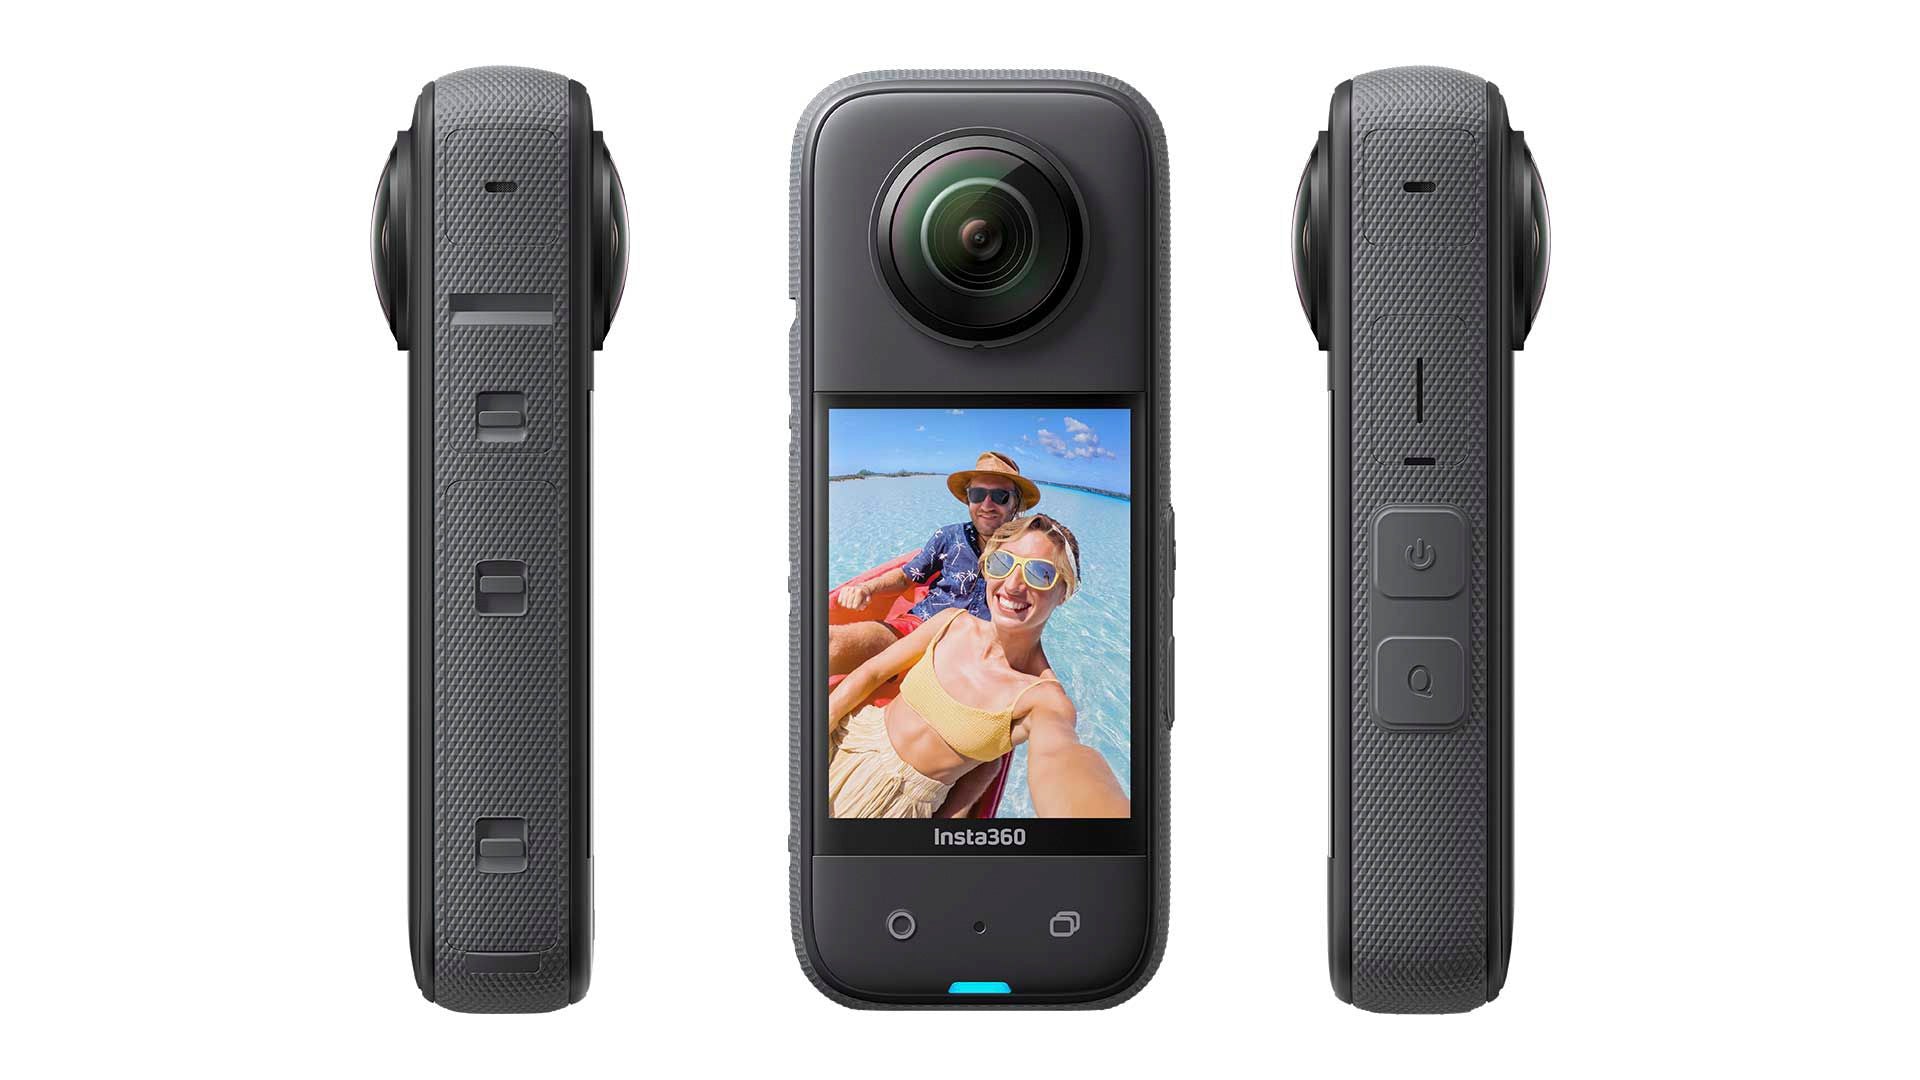 Insta360 X3 action cam uses new 48MP sensors, larger touchscreen & better  performance: Digital Photography Review